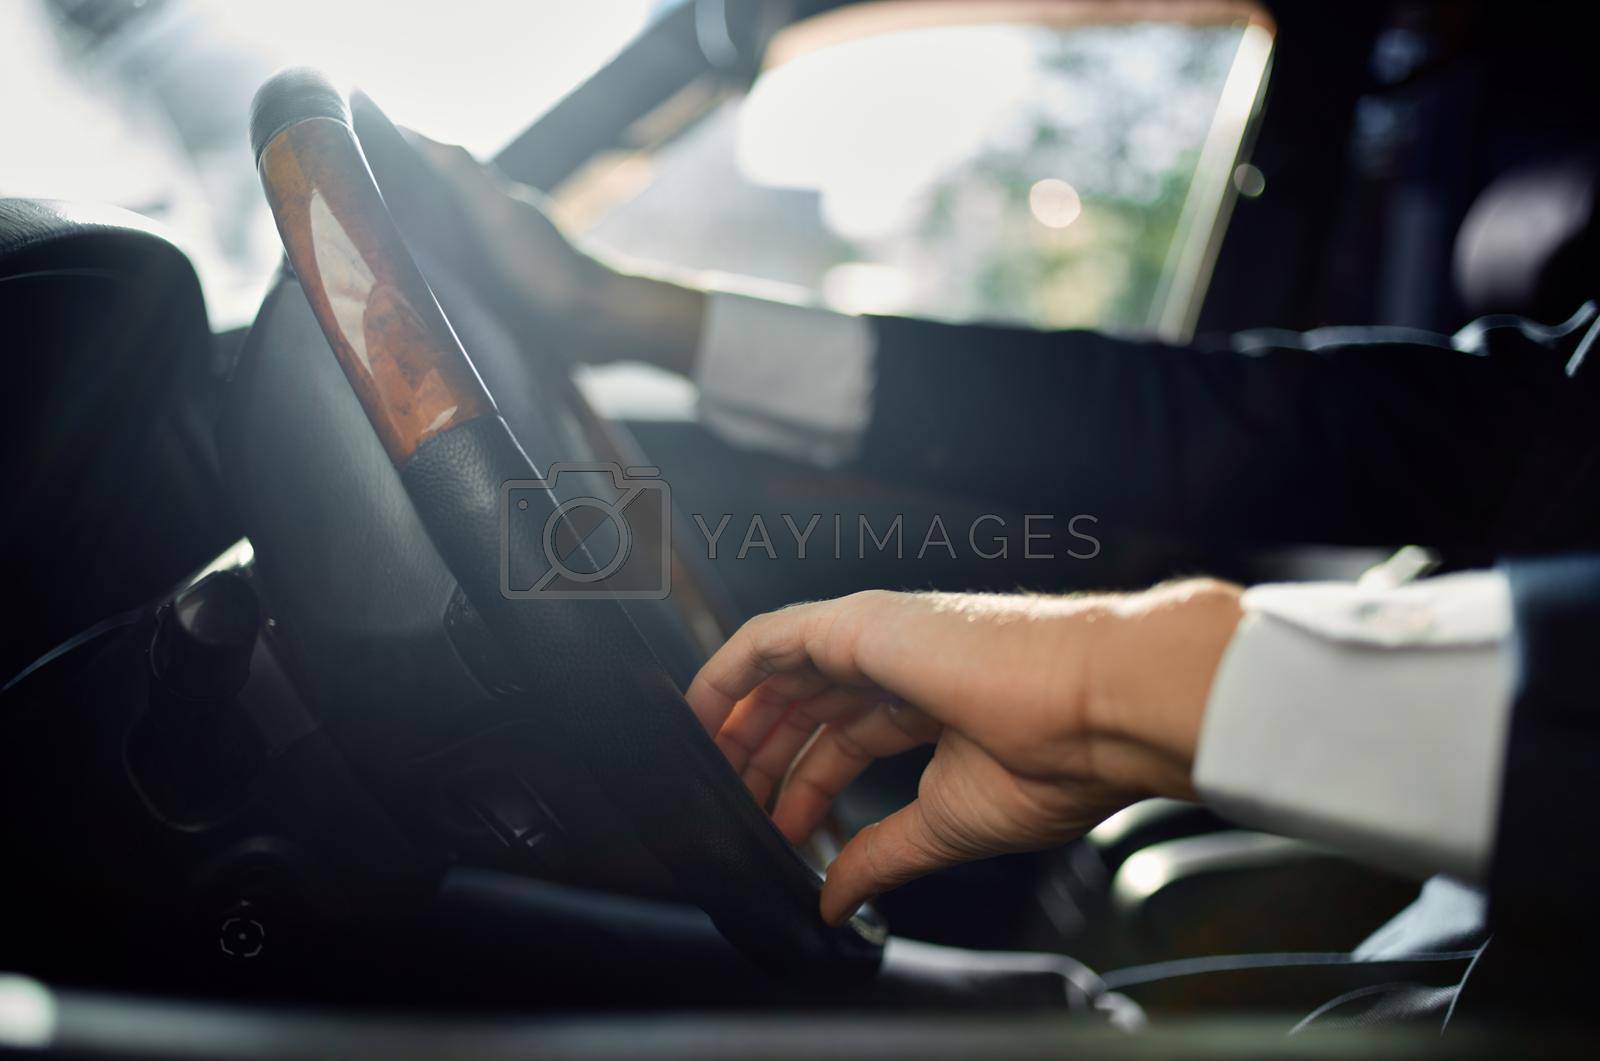 businessmen Driving a car trip luxury lifestyle communication by phone. High quality photo